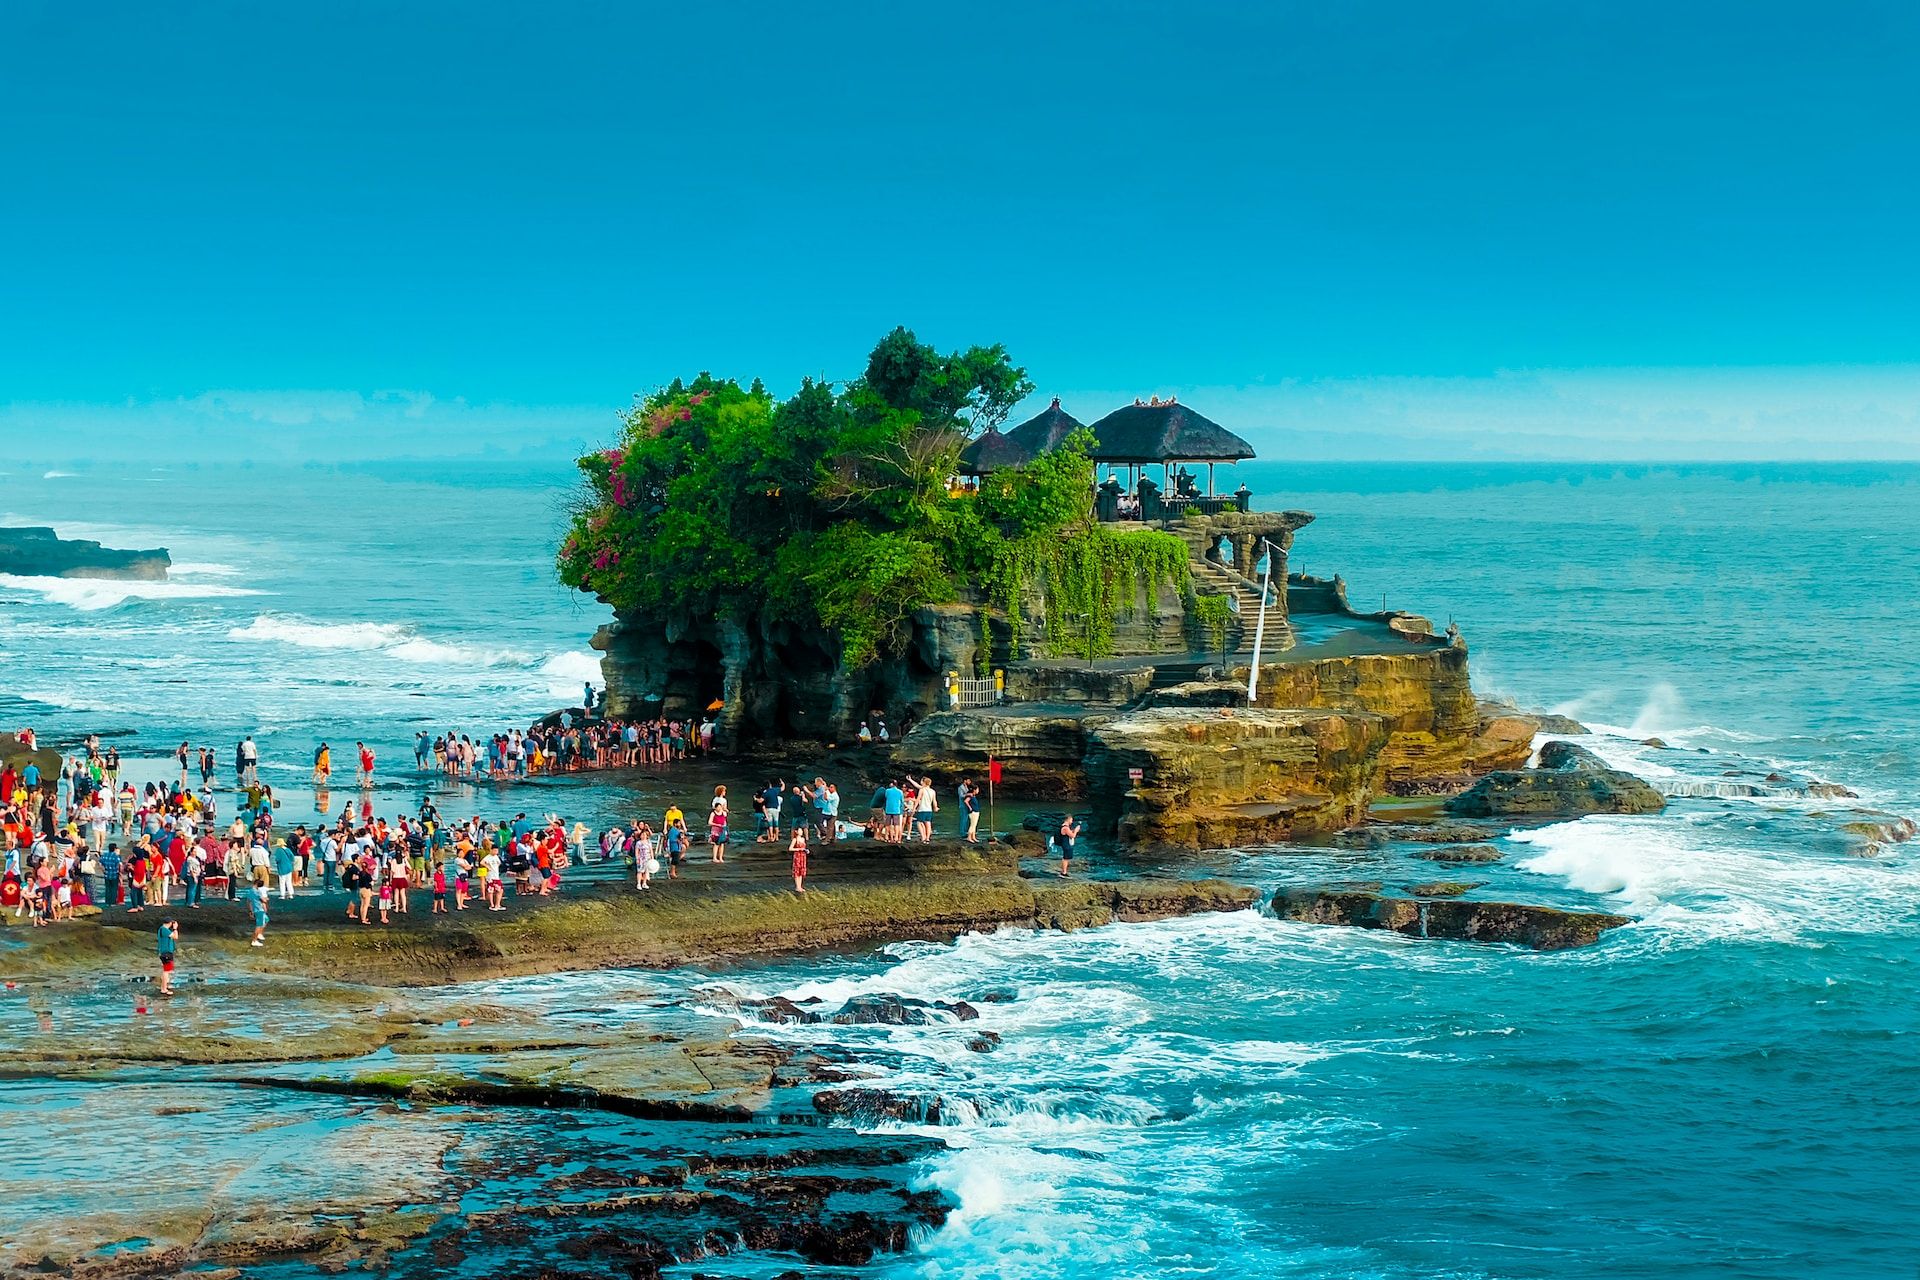 People at Tanah Lot Temple in Bali, Indonesia